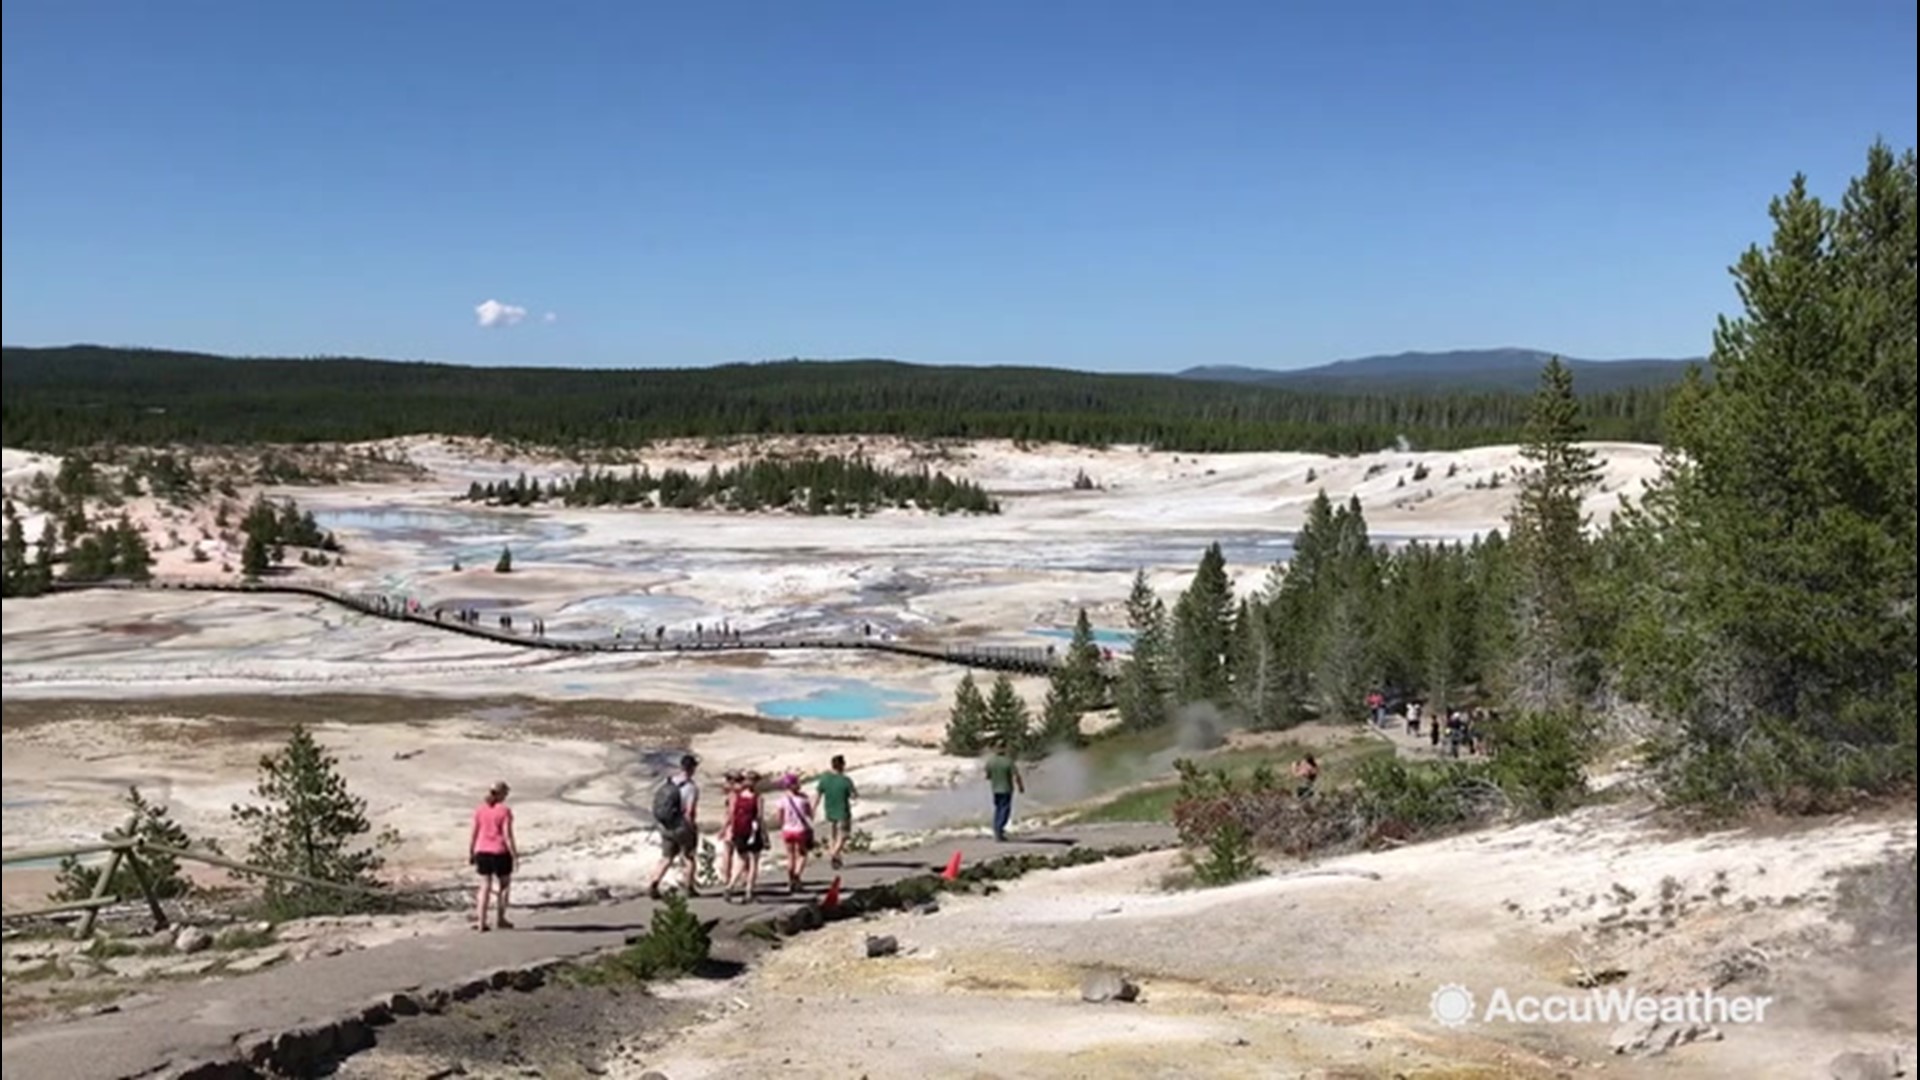 Yellowstone National Park was the first national park ever created in the United States. Lincoln Riddle spent the day inside the park as apart of  AccuWeather's Great American Road trip, exploring the parks wildlife, geysers and hot springs.